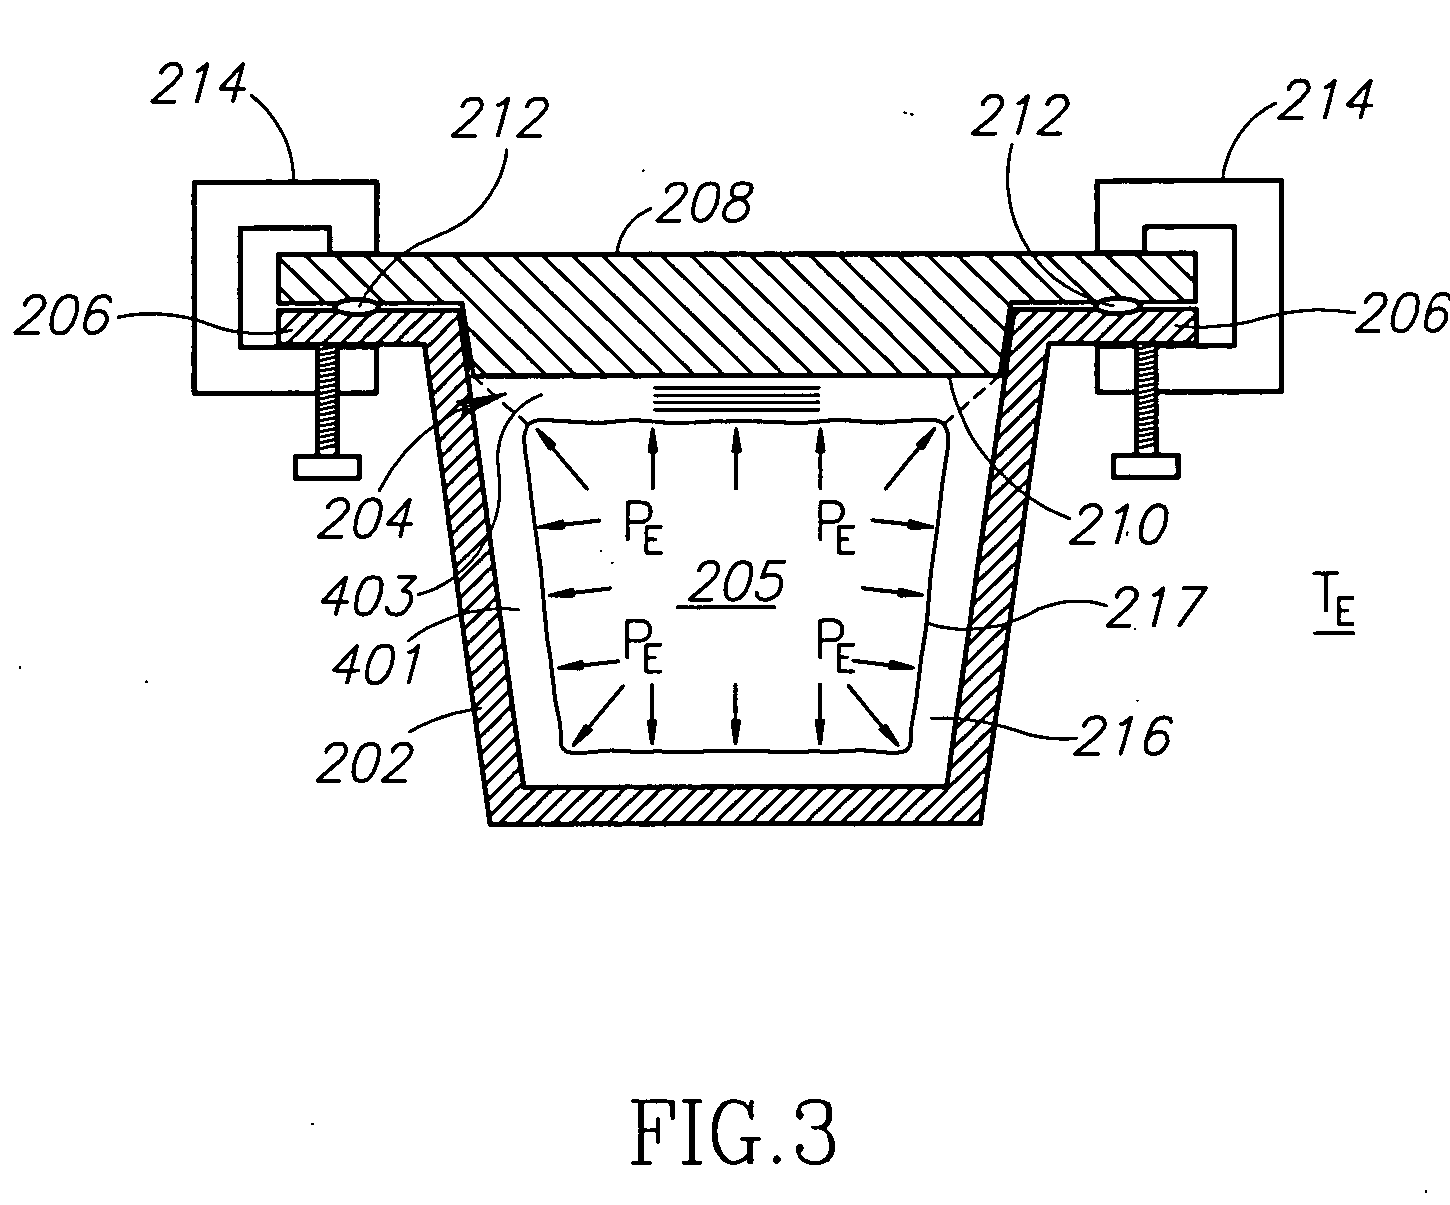 Apparatus and methods for fabrication of composite components